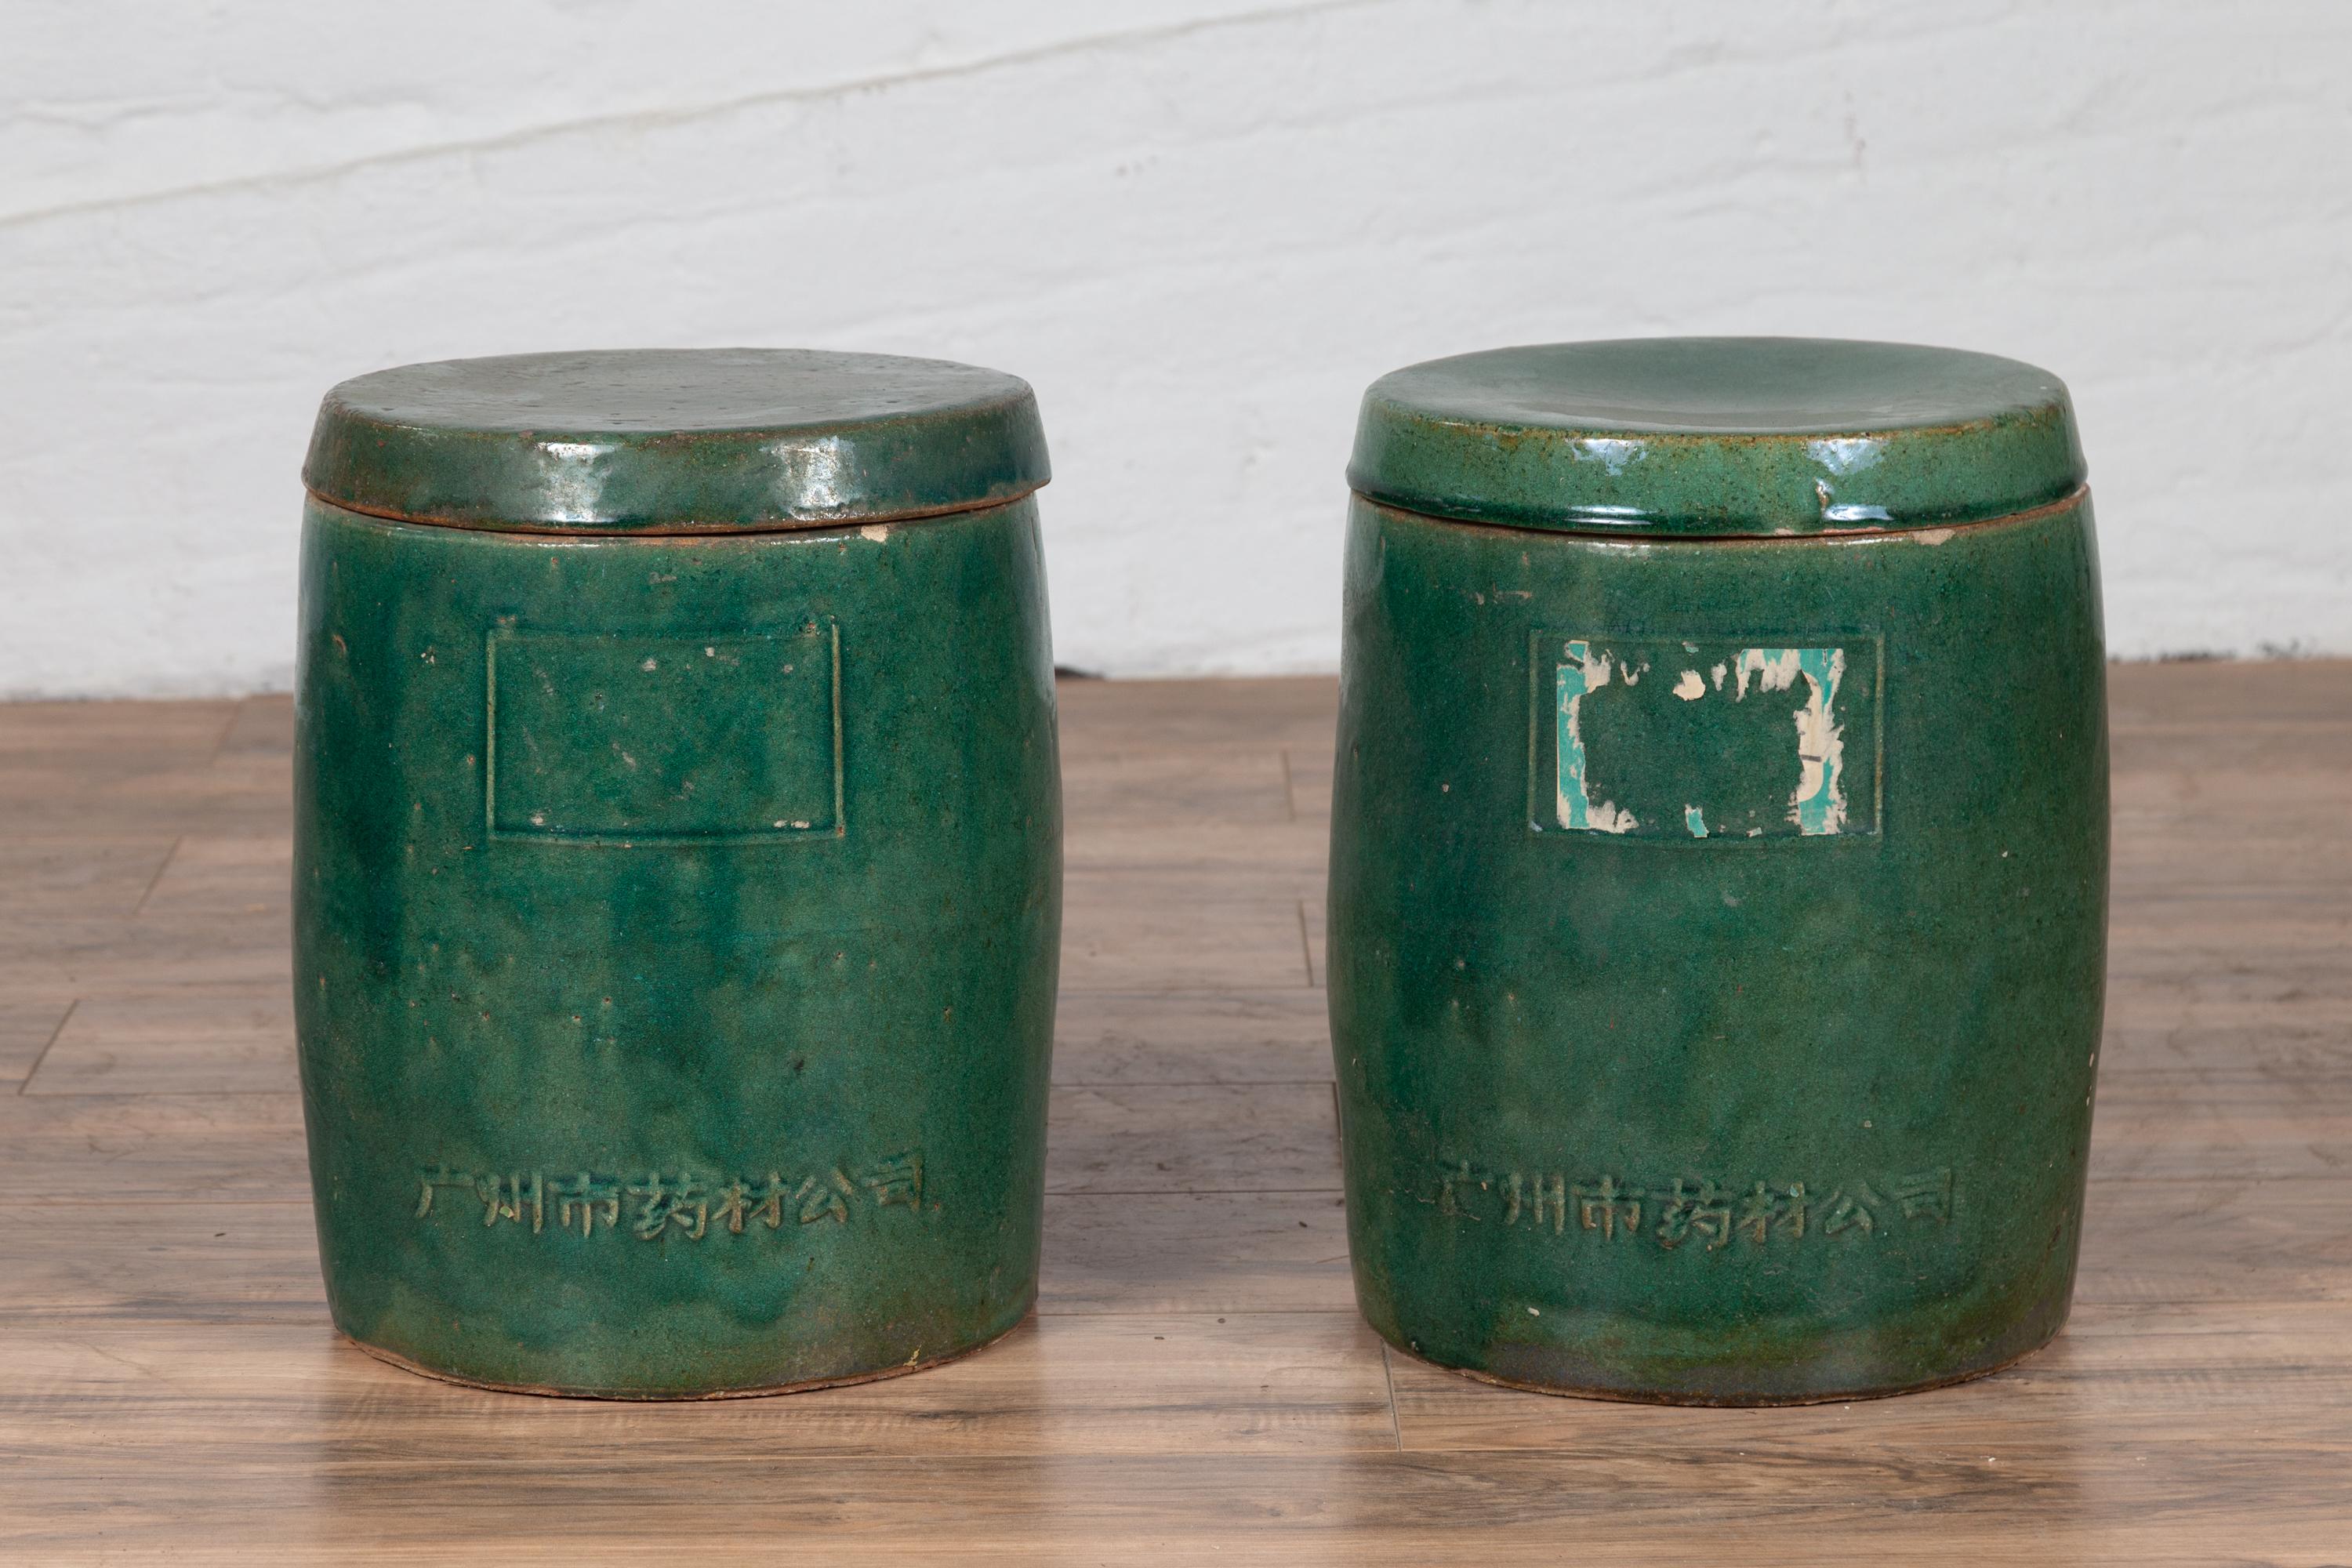 A pair of Chinese Hunan antique green glazed ceramic jars from the early 20th century, with lids and calligraphy. Born in the mountainous province of Hunan in southern China, each of this pair of green glazed lidded jars, features a circular body,